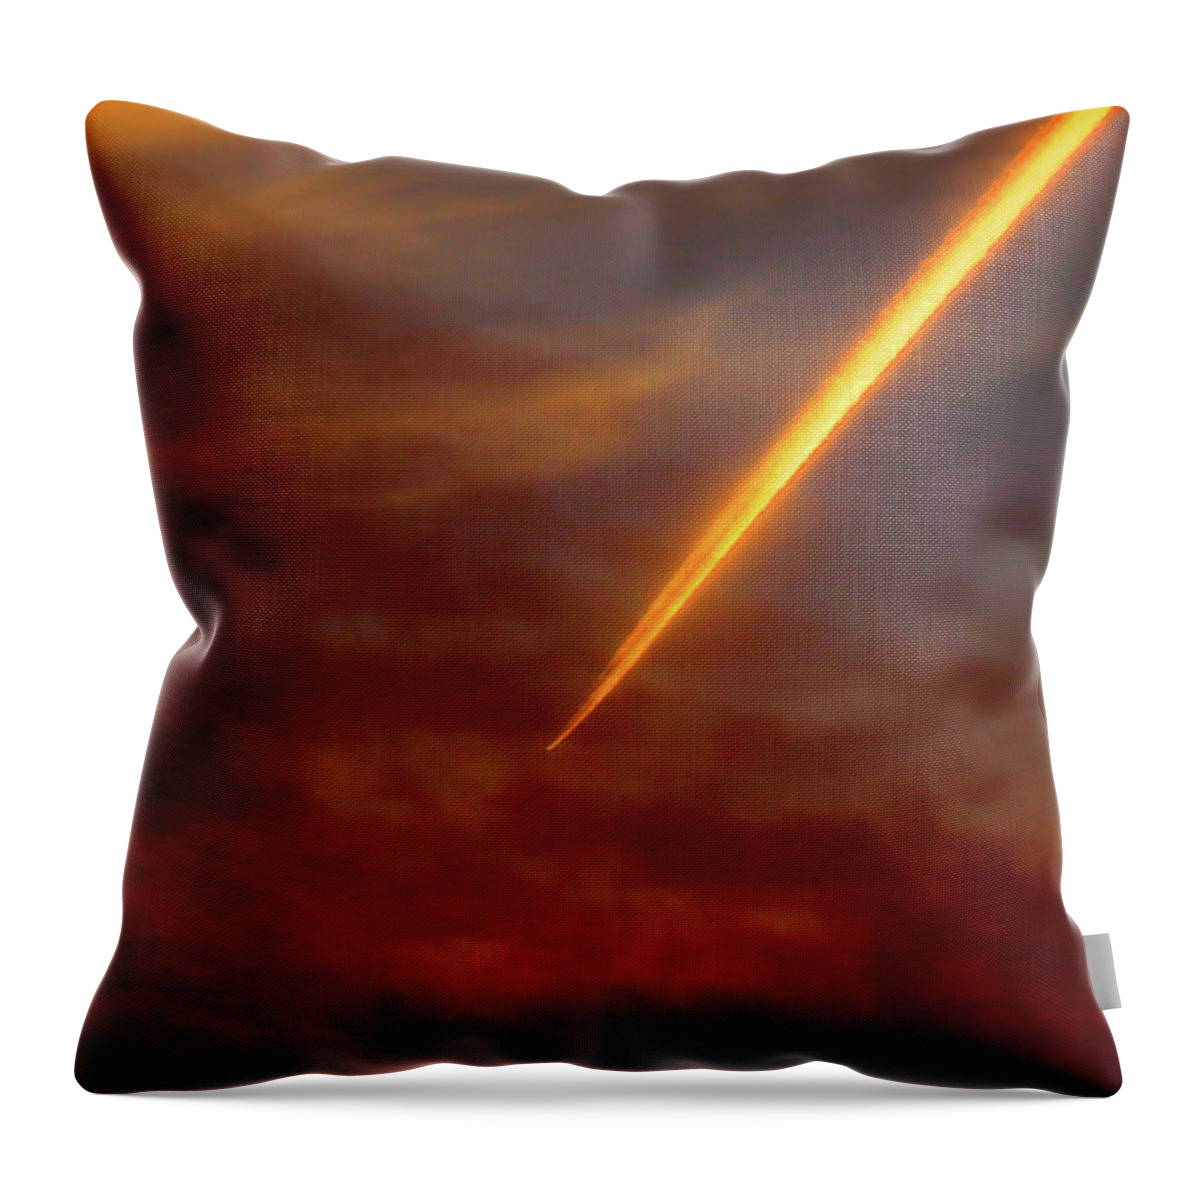 Clouds Throw Pillow featuring the photograph Plane Streaking Through Smoky Evening Sky by Linda Stern